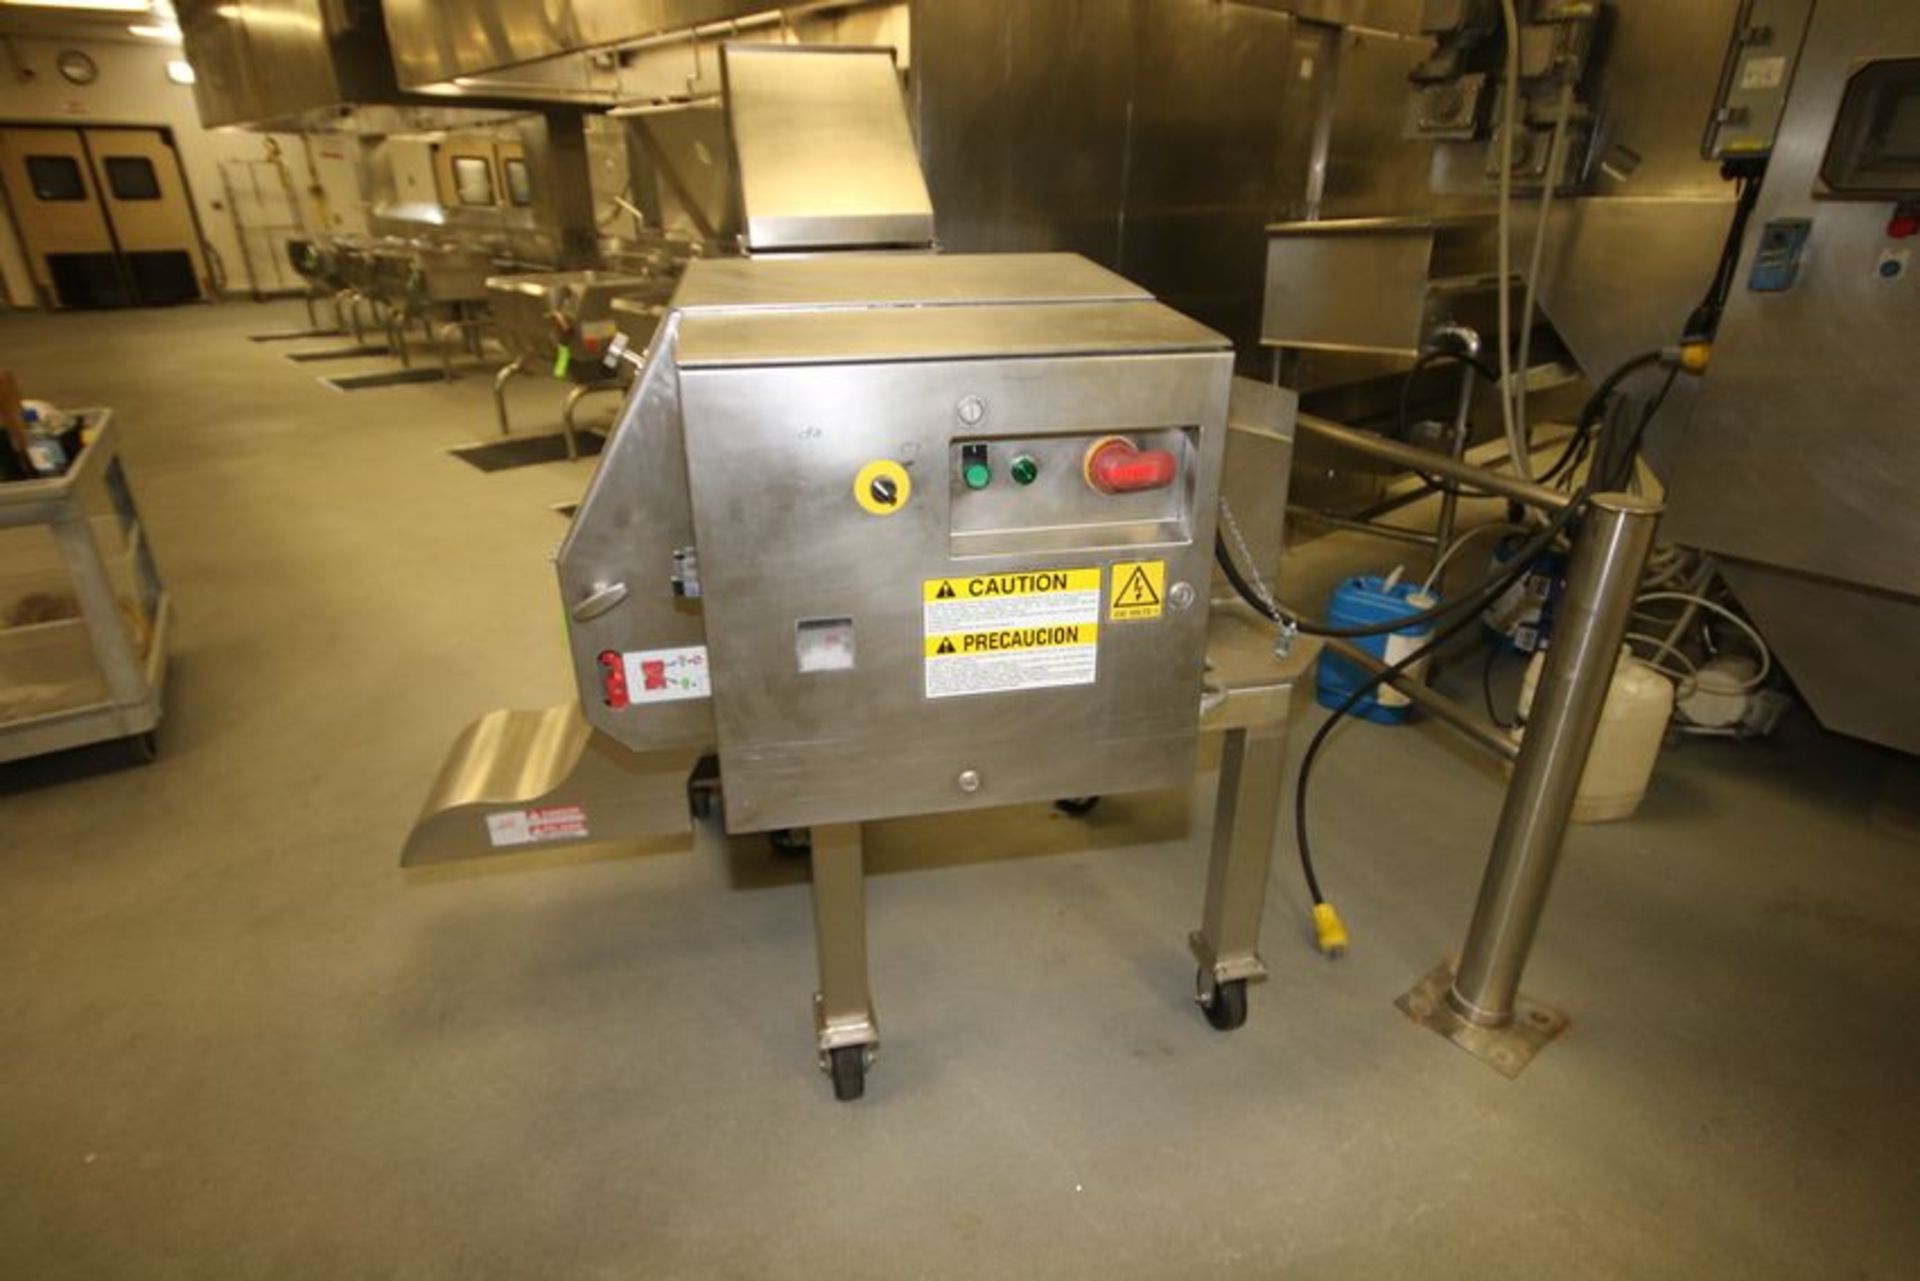 Urschel Diversa Cut 2110 Dicer, Model DC, S/N 174 with S/S Clad Motor, Controls, Mounted on S/S - Image 3 of 12